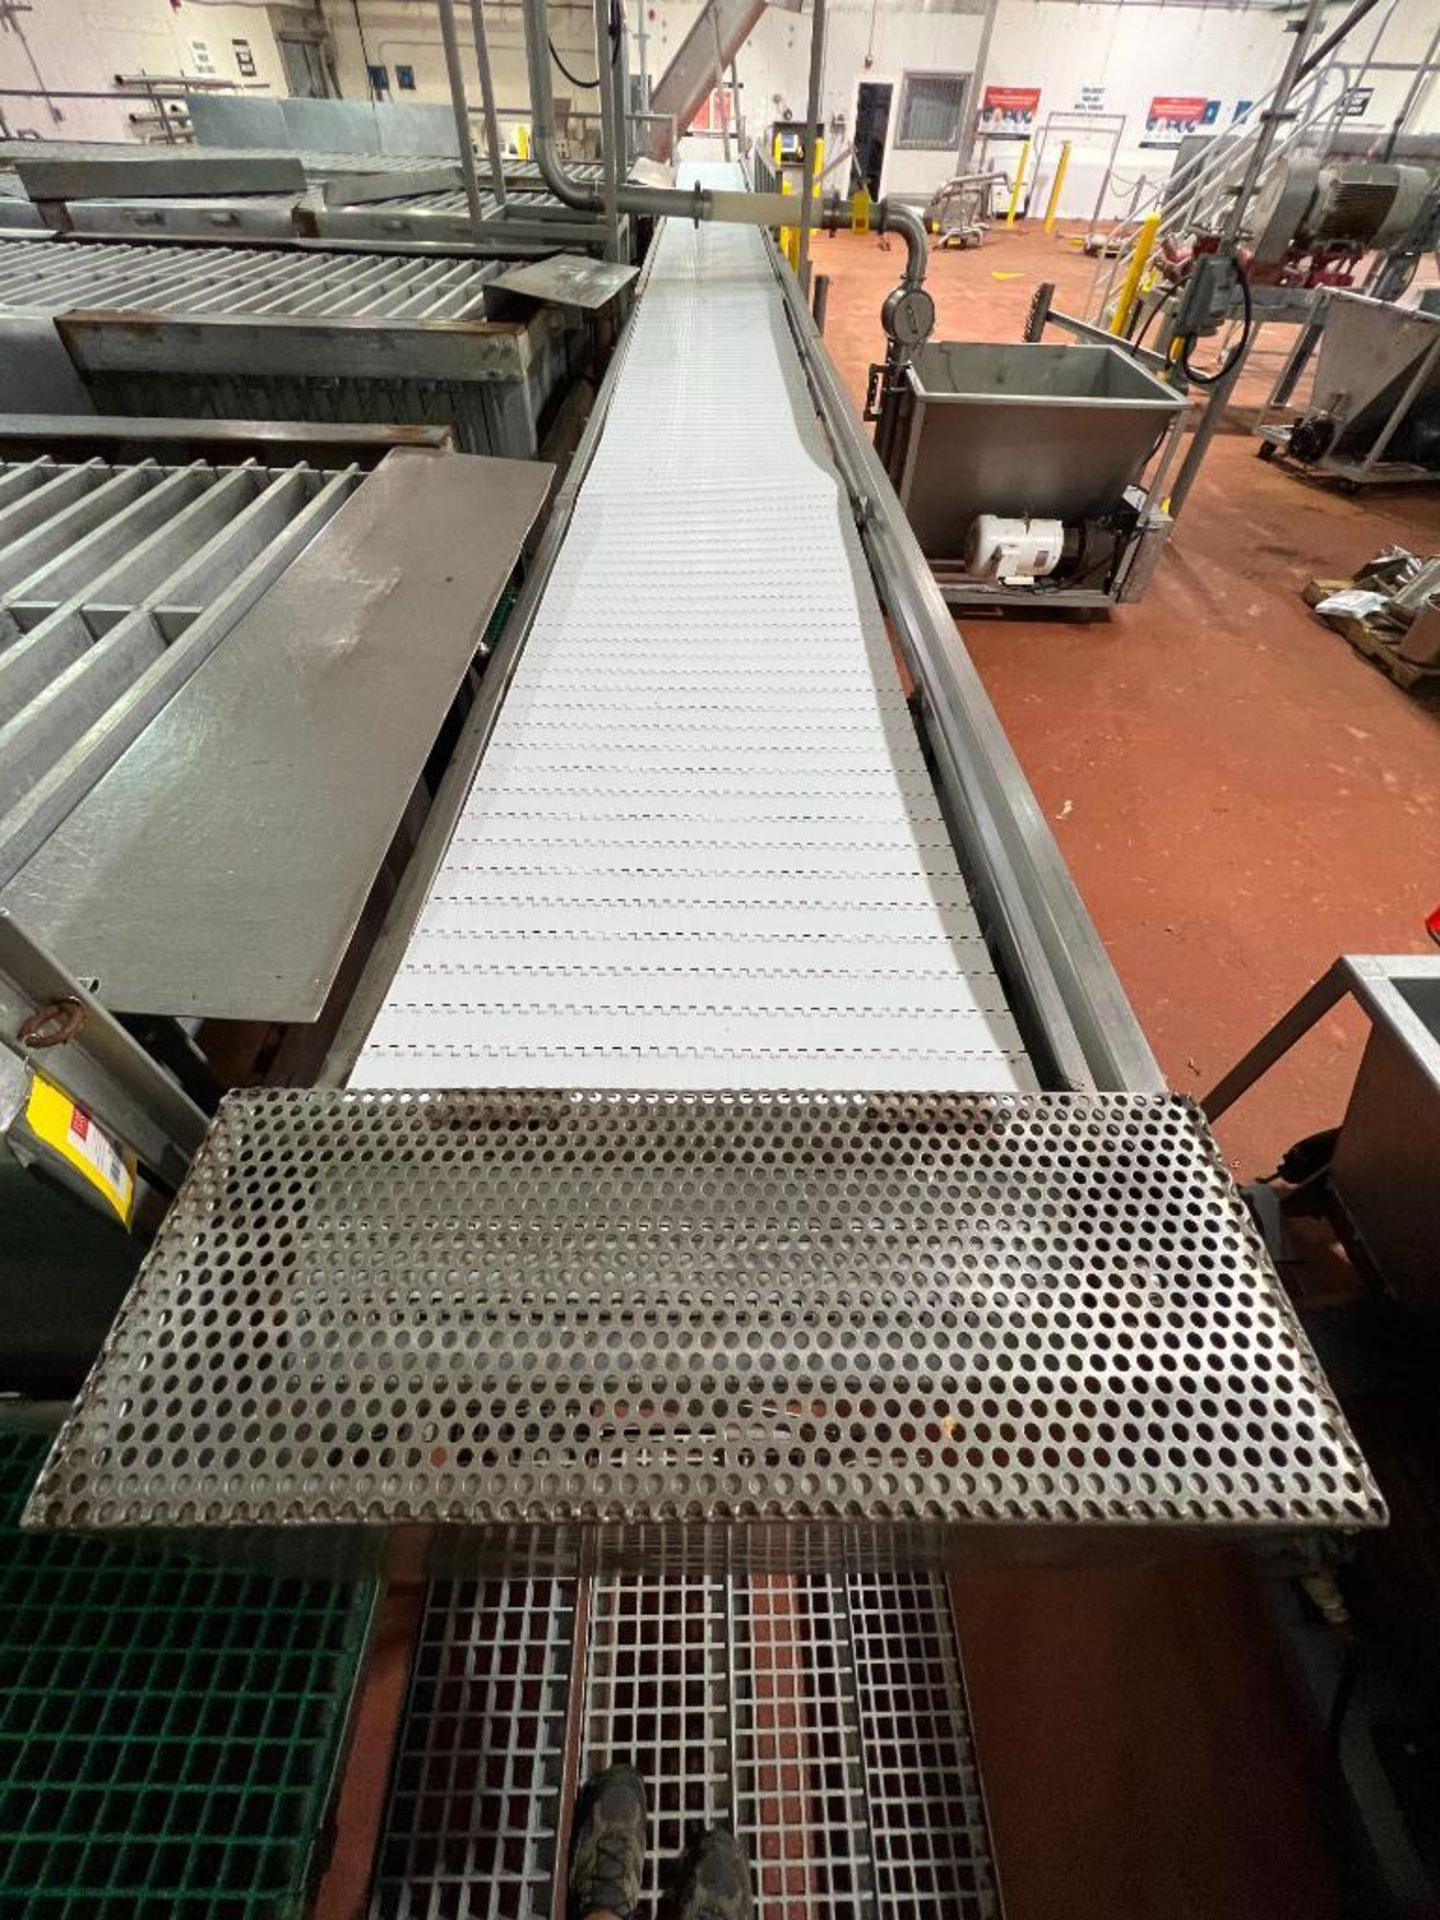 S/S Frames Conveyor with Drive, Dimensions= 50' x 2' - Rigging Fee: $400 - Image 3 of 3